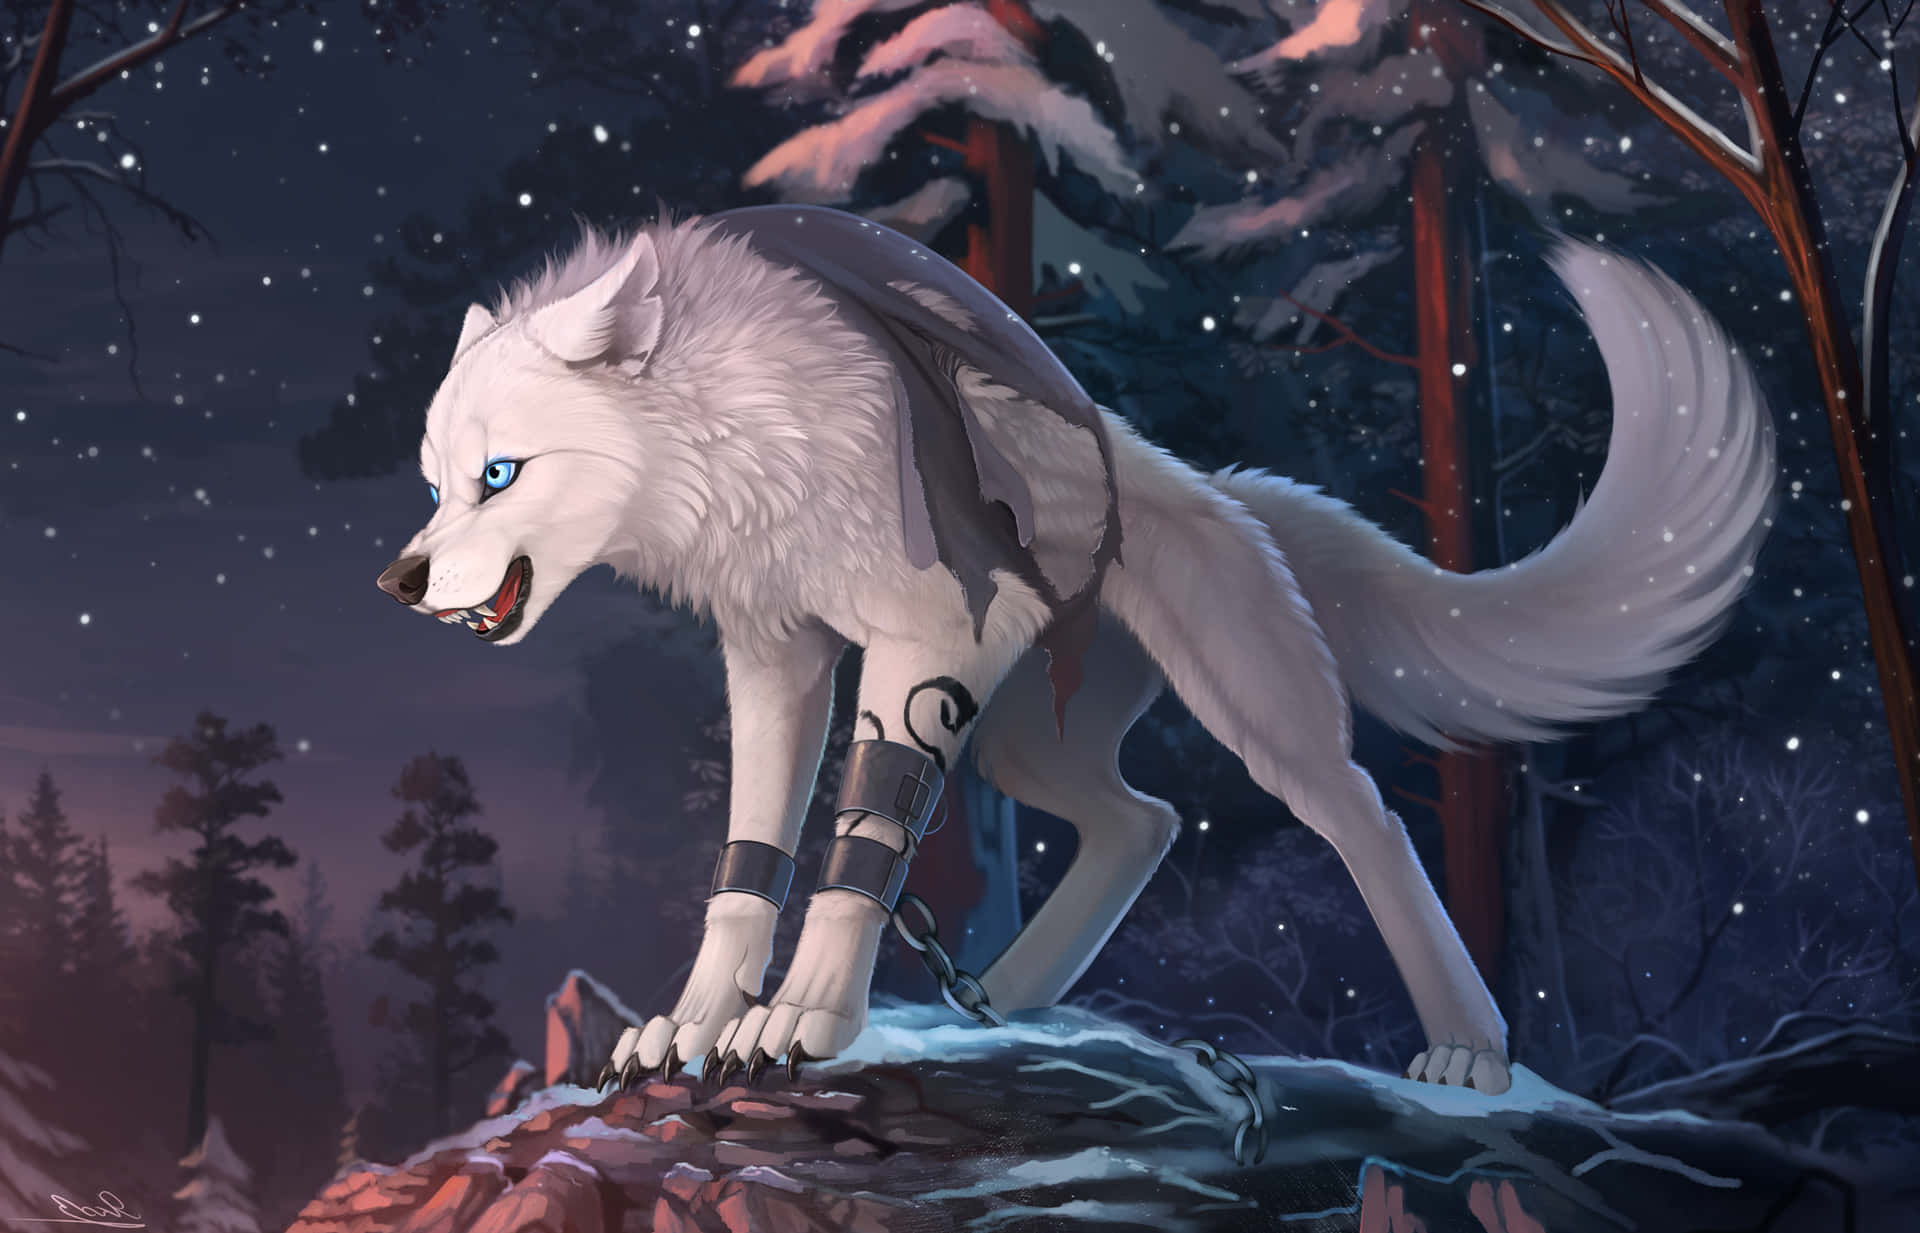 Free Cool Anime Wolf Wallpaper Downloads, [100+] Cool Anime Wolf Wallpapers  for FREE 